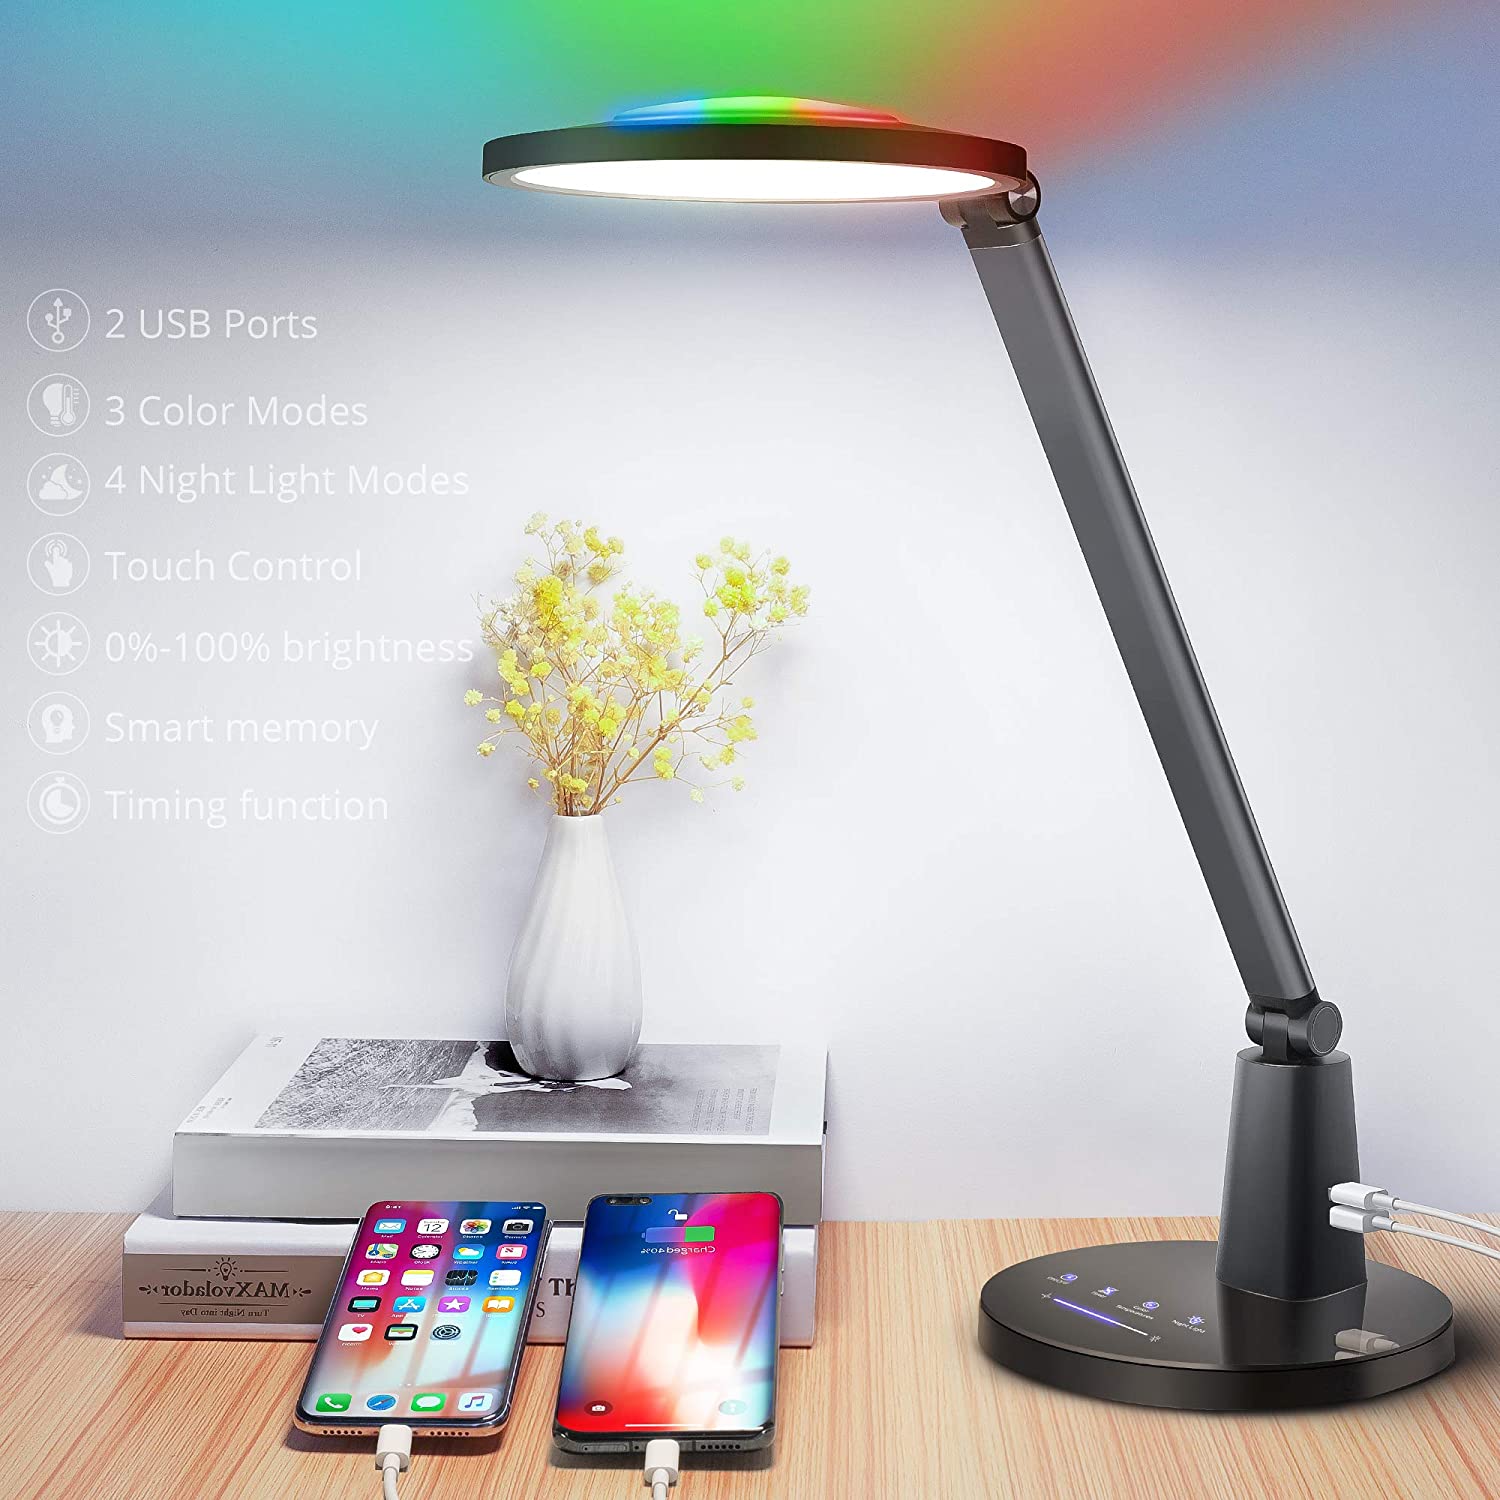 Touch Control Table Lamp with RGB Night Light & 2 USB Ports $24.99